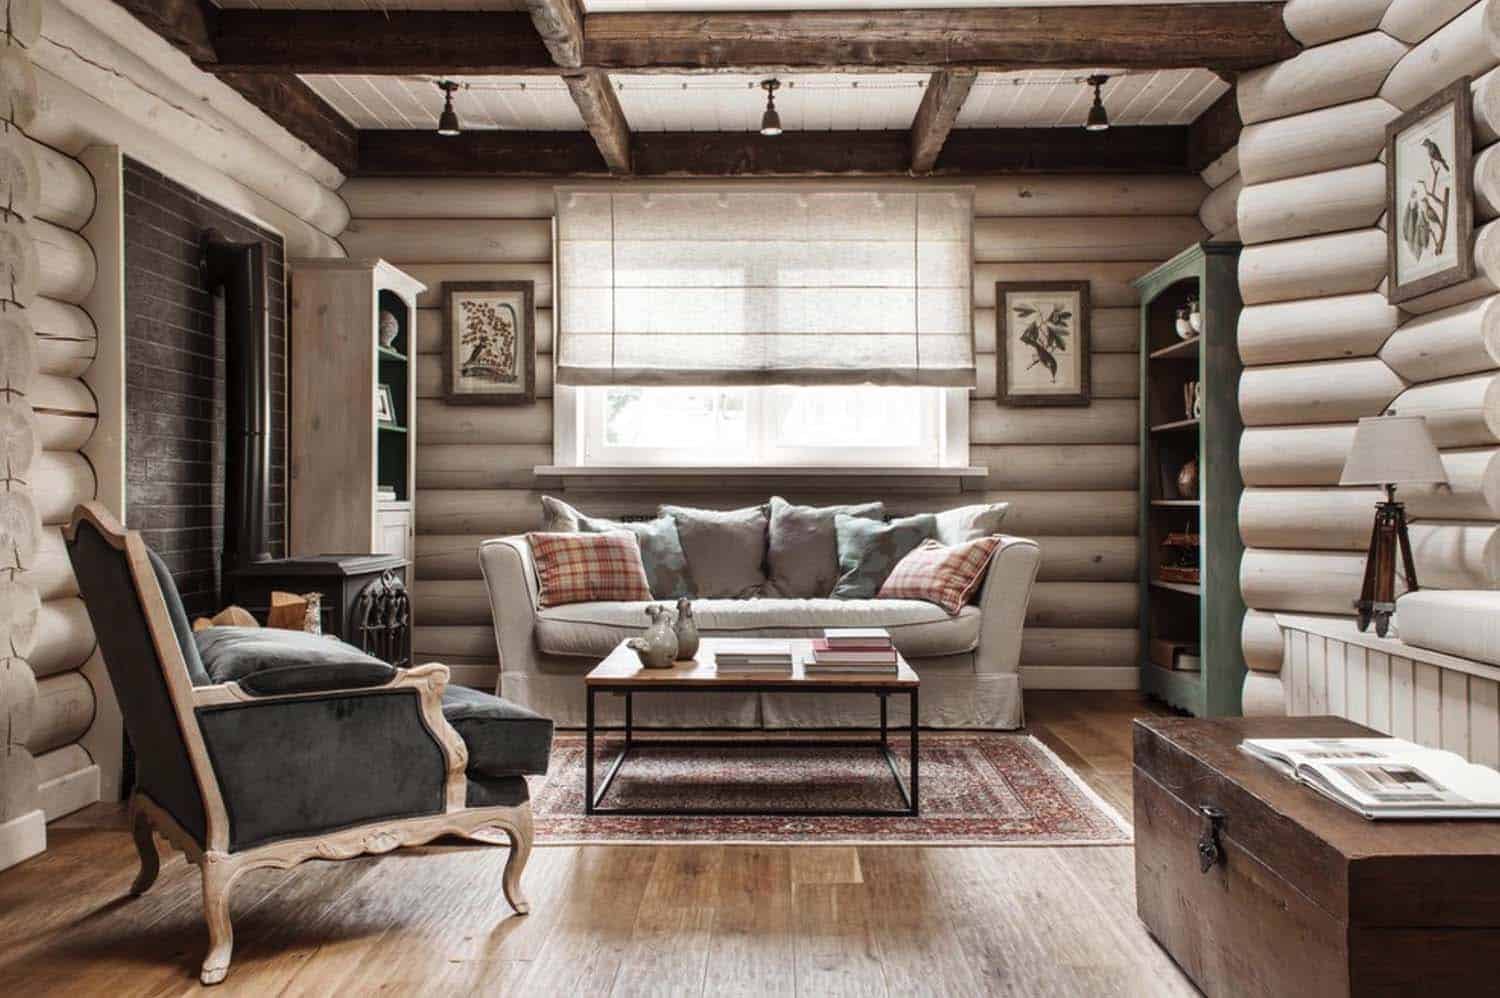 Rustic-chic log cabin style home in the countryside of Moscow